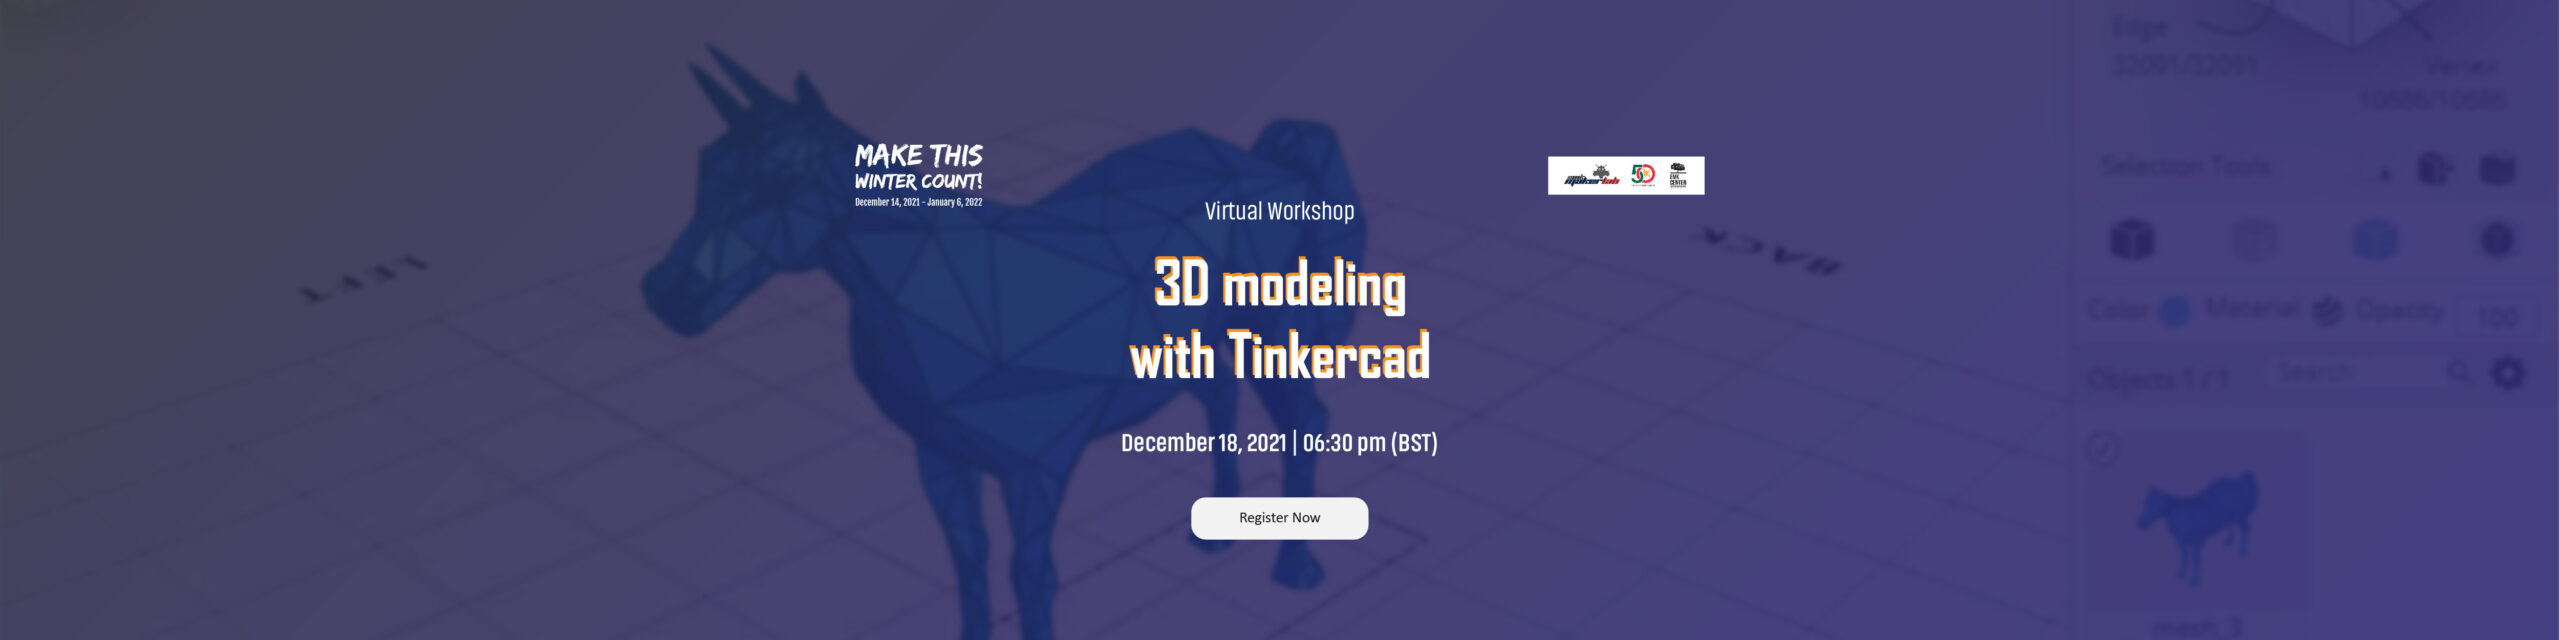 3D modeling with Tinkercad